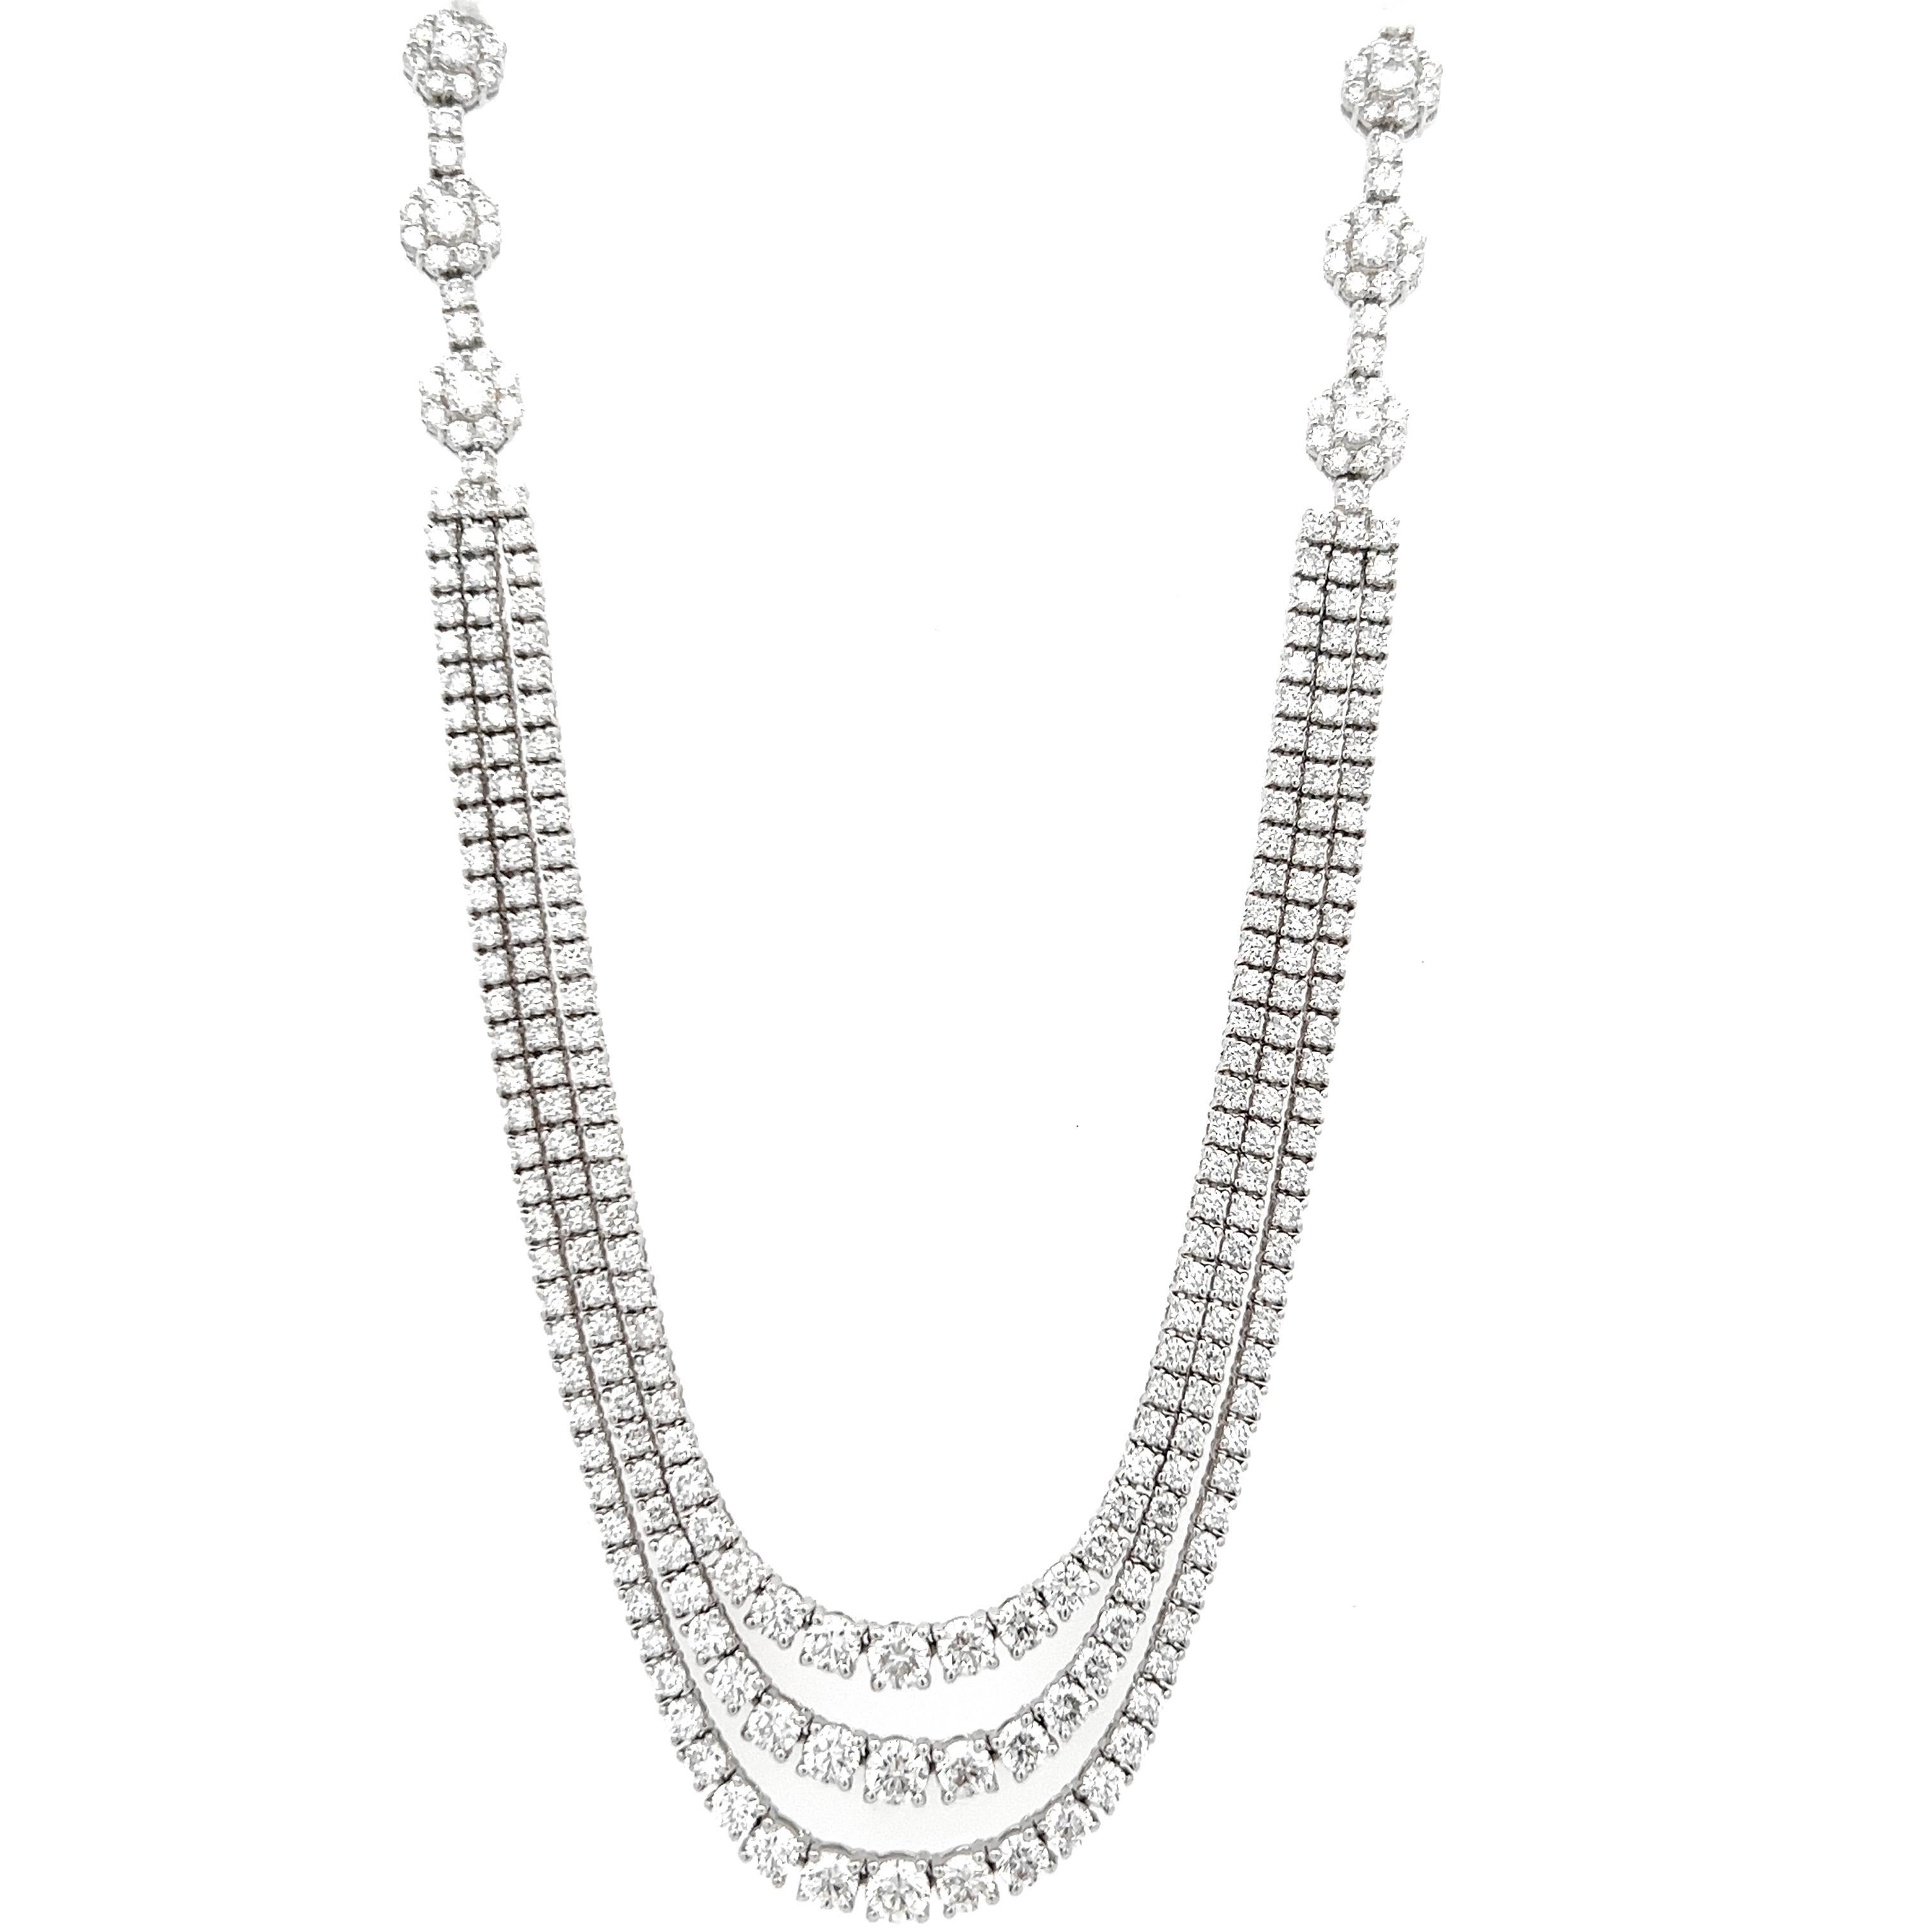 Beautiful and classic diamond three-row tennis necklace with motif. By Alexander Beverly Hills.
285 round brilliant diamonds, 9.21ct. Approximately F/G color and VS clarity. 18k white gold, 29.18 grams, 17in.
Accommodated with an up-to-date digital